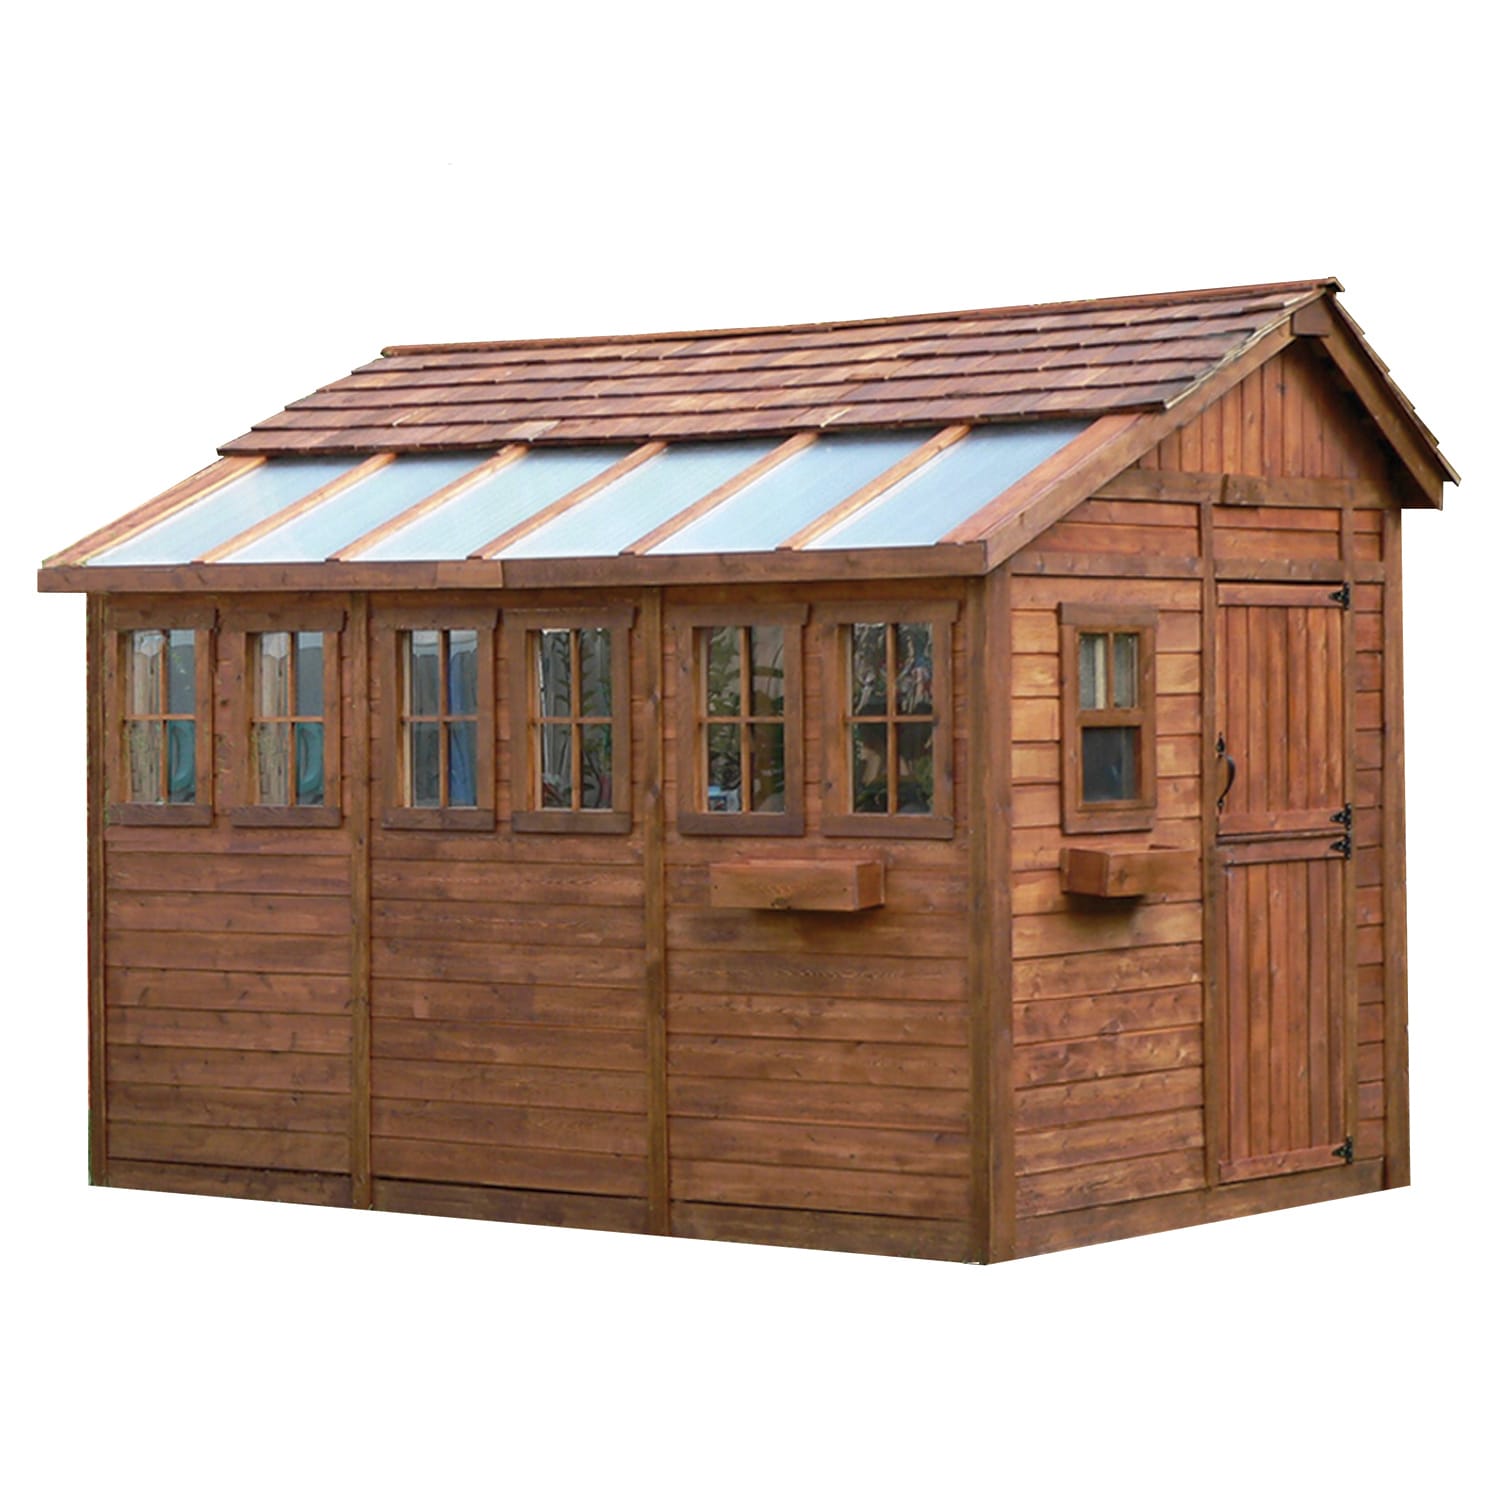  lowes outdoor sheds for sale